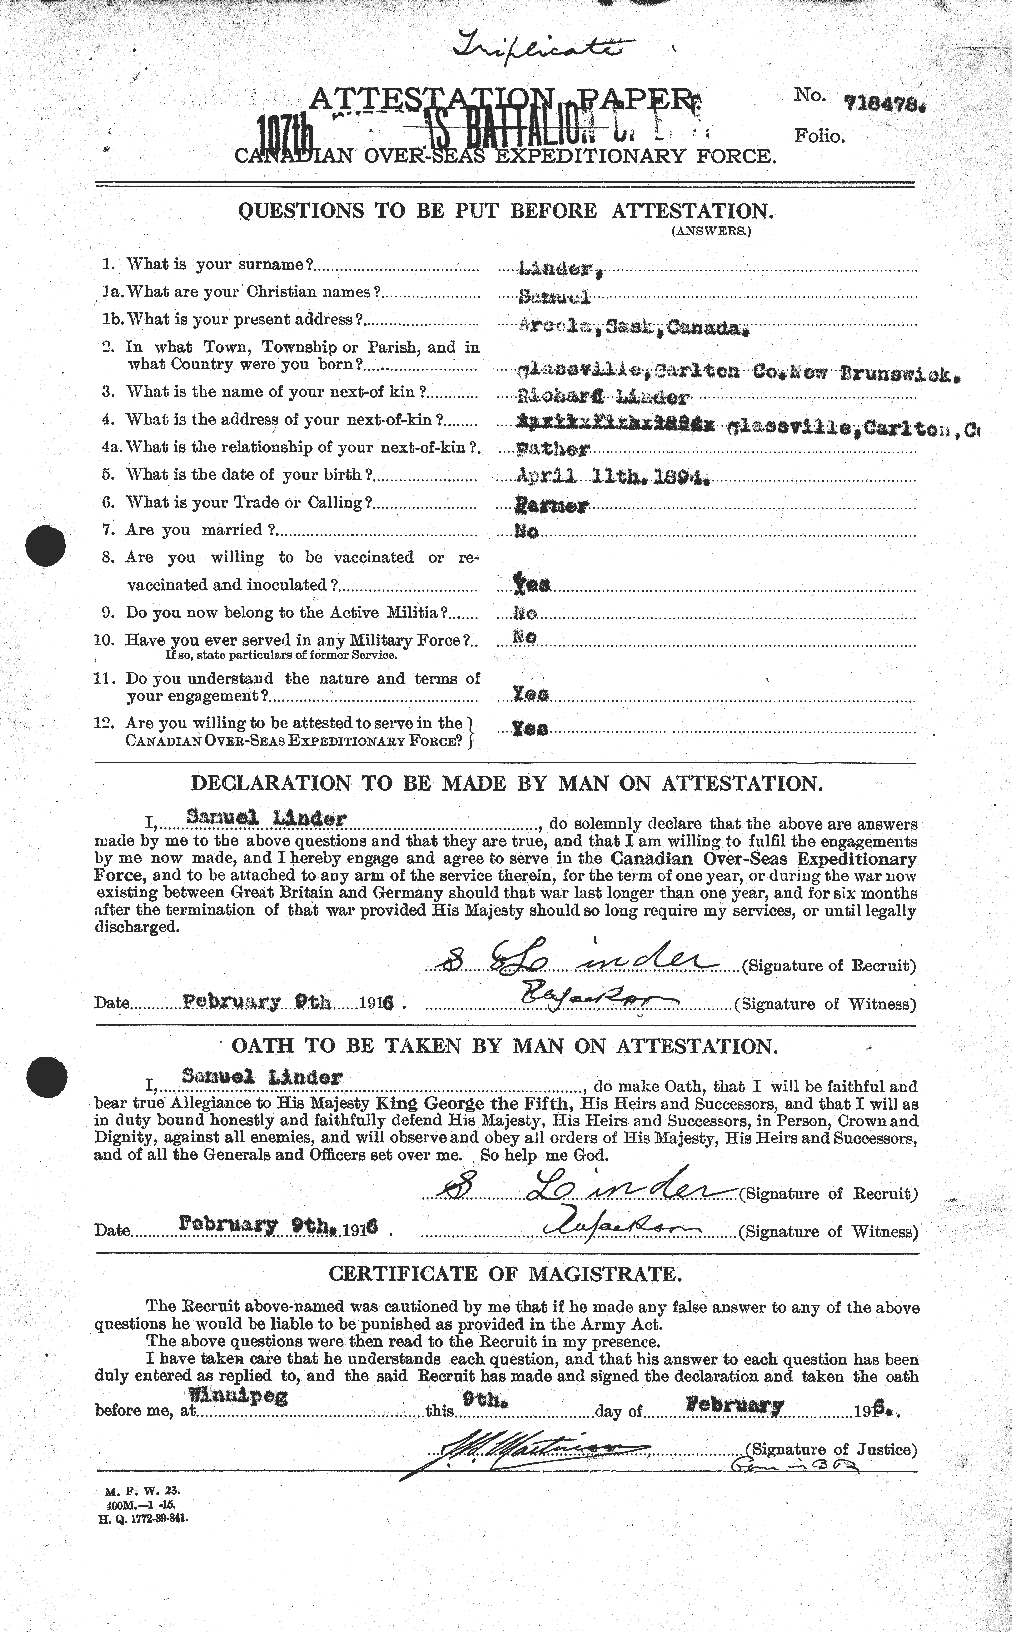 Personnel Records of the First World War - CEF 467728a